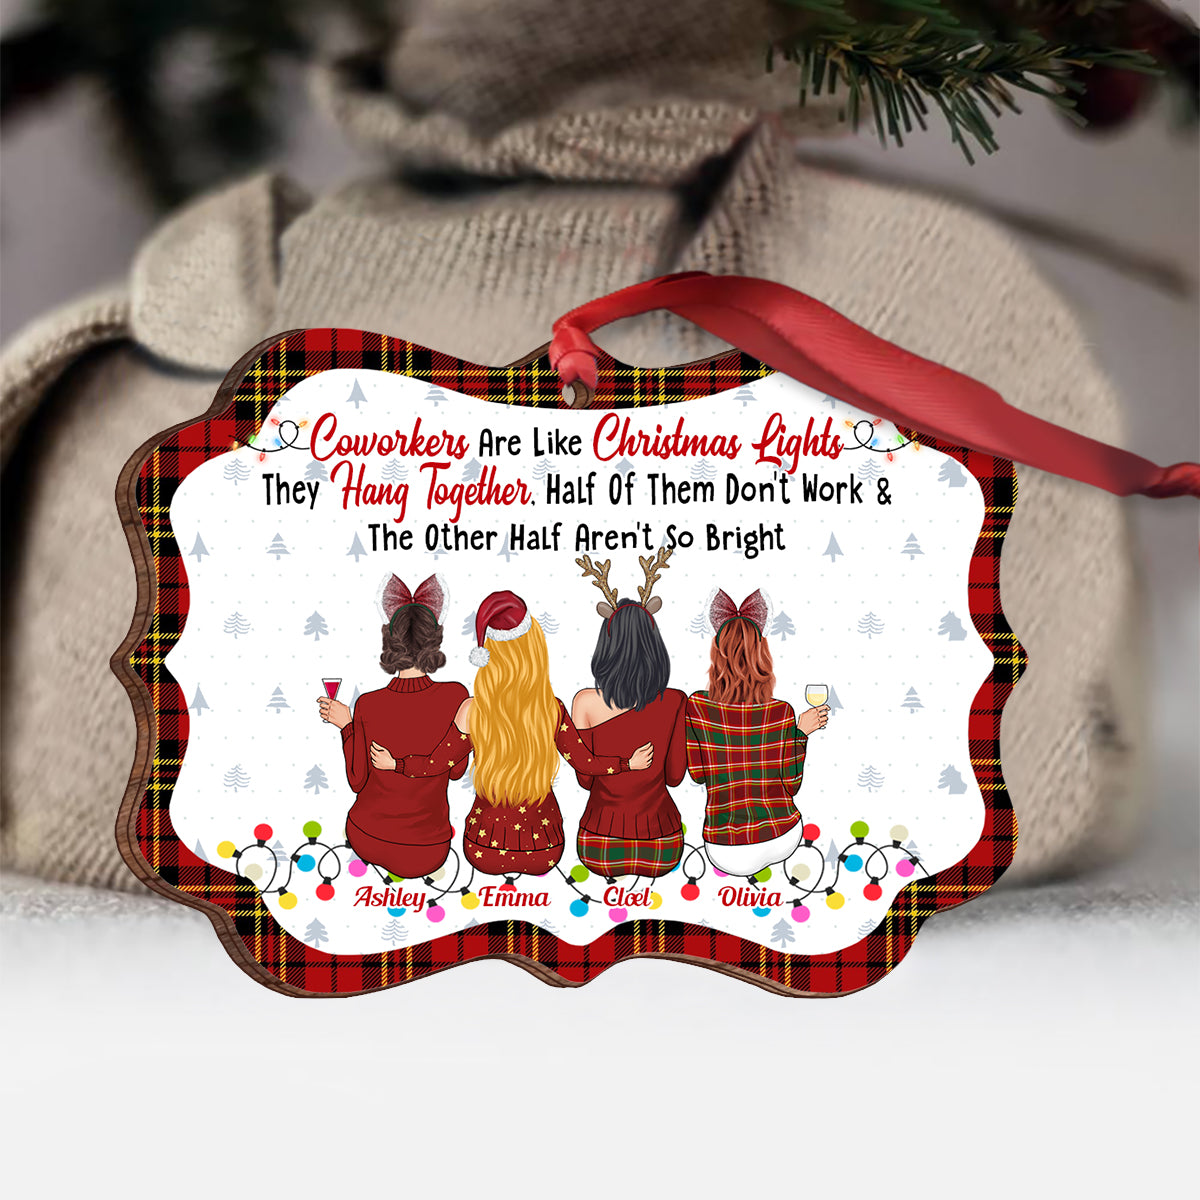 Coworkers Are Like Christmas Lights - Personalized Colleague Ornament